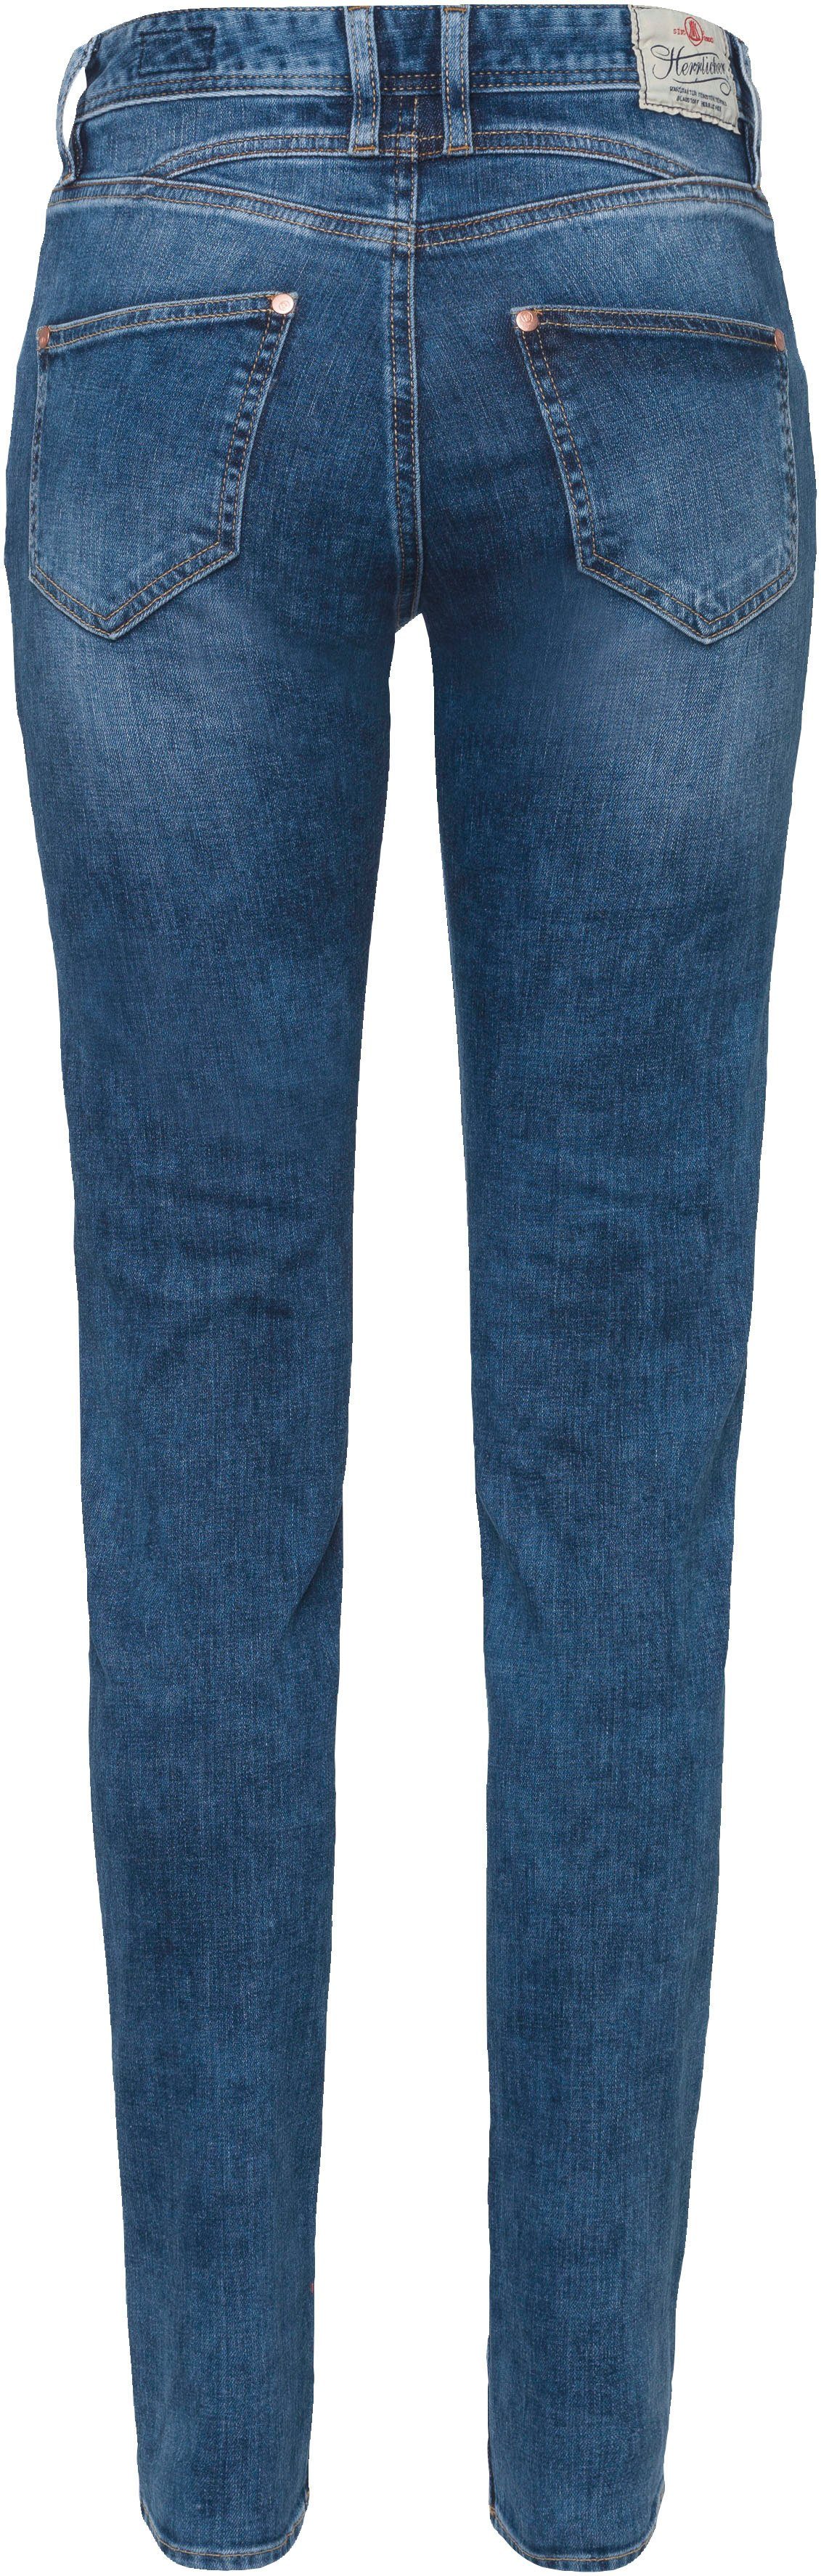 polo Waist SLIM DENIM Slim-fit-Jeans Normal Polyester blue Herrlicher RECYCLED Recycled PEPPY